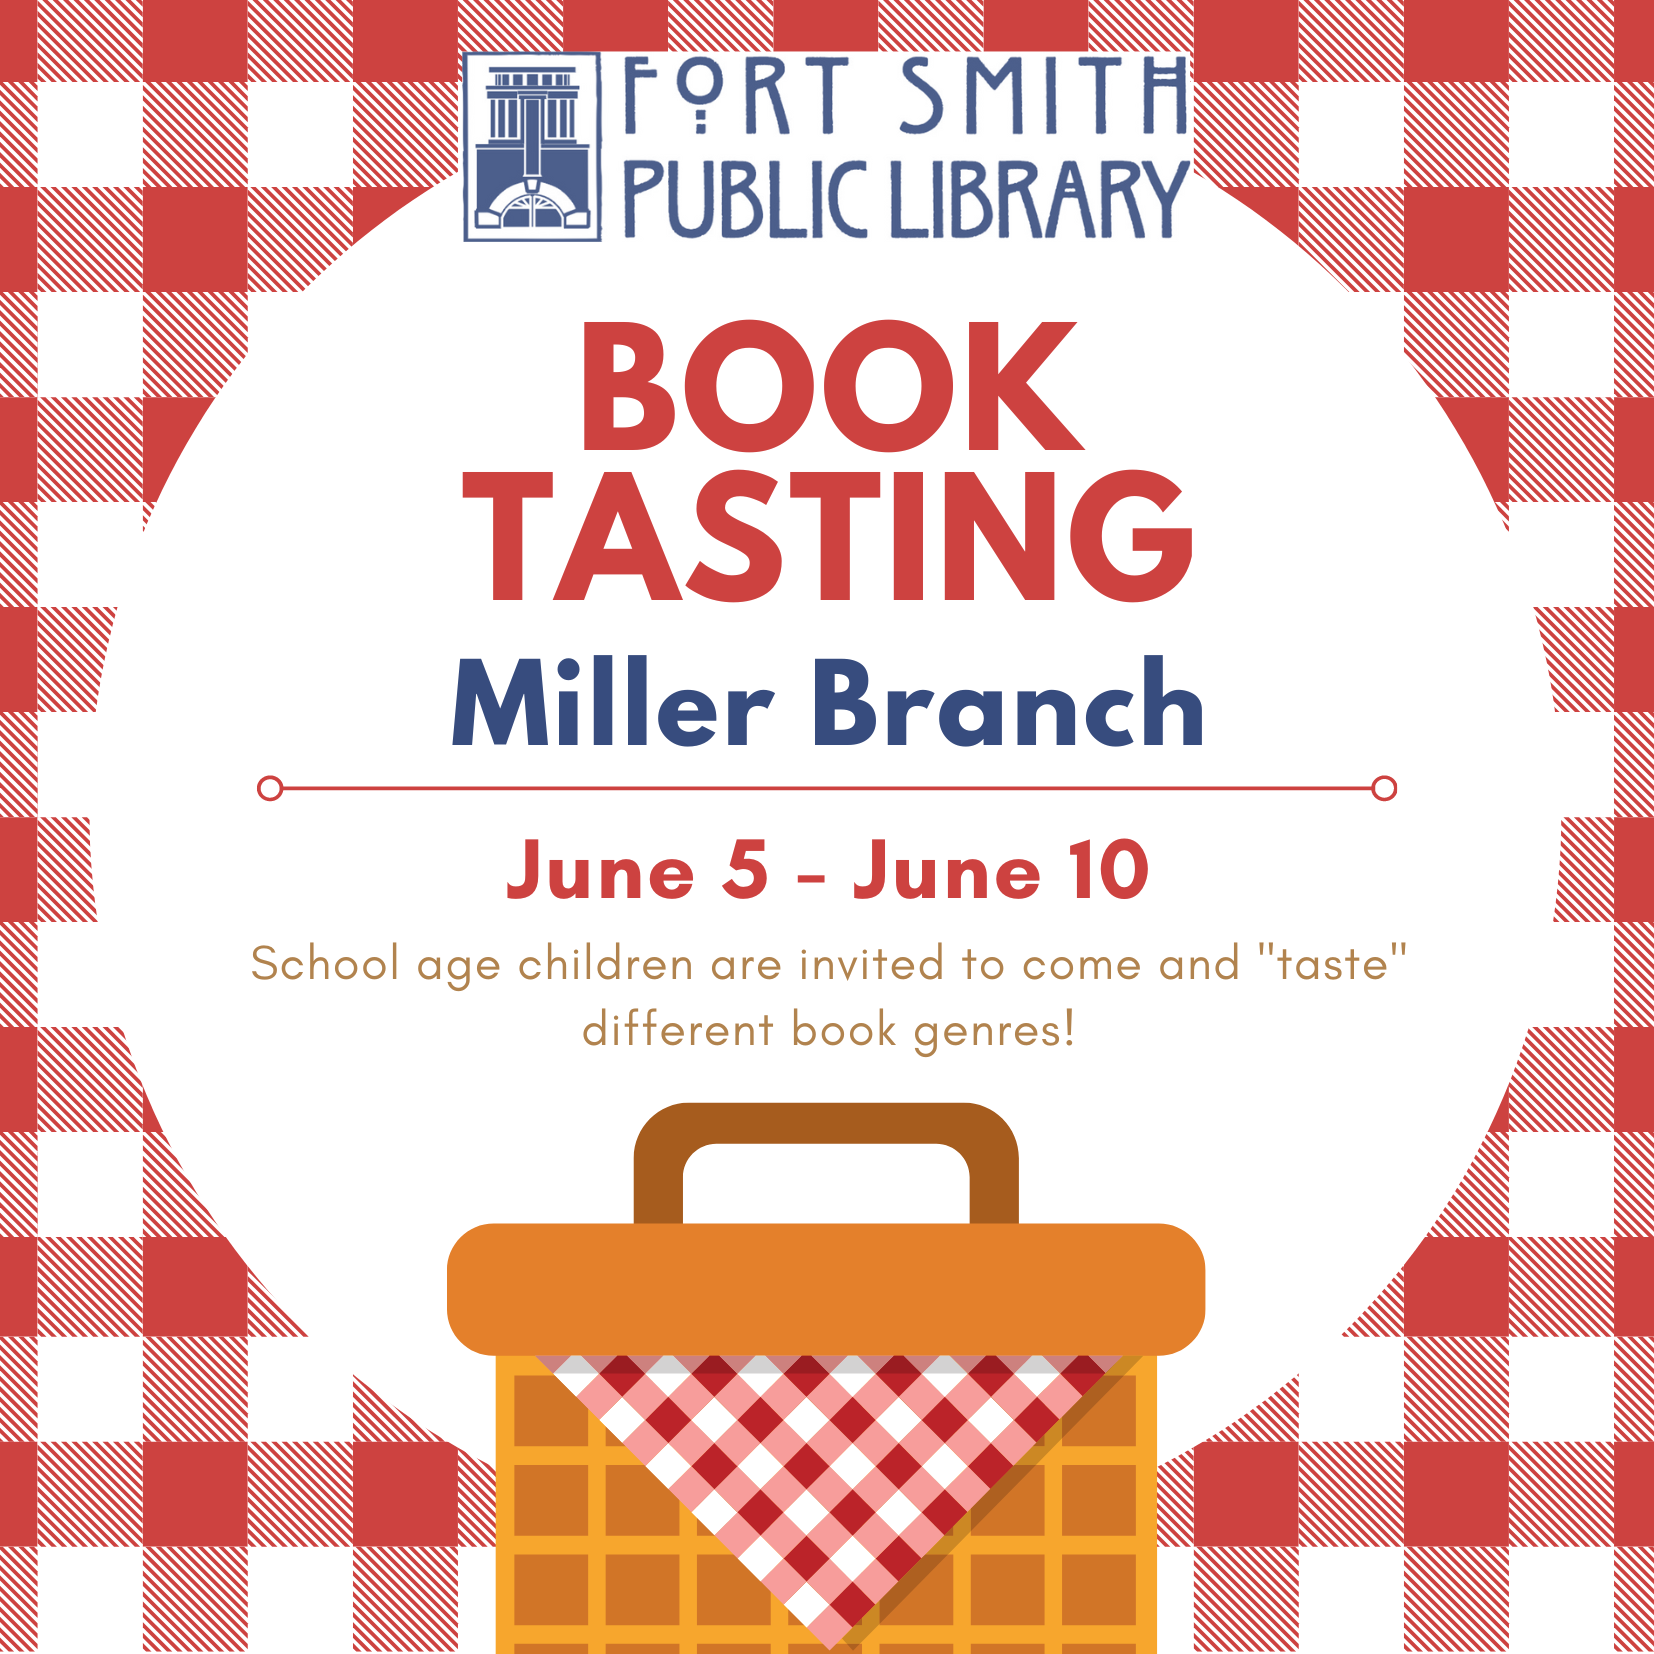 image advertising a book tasting for school age children